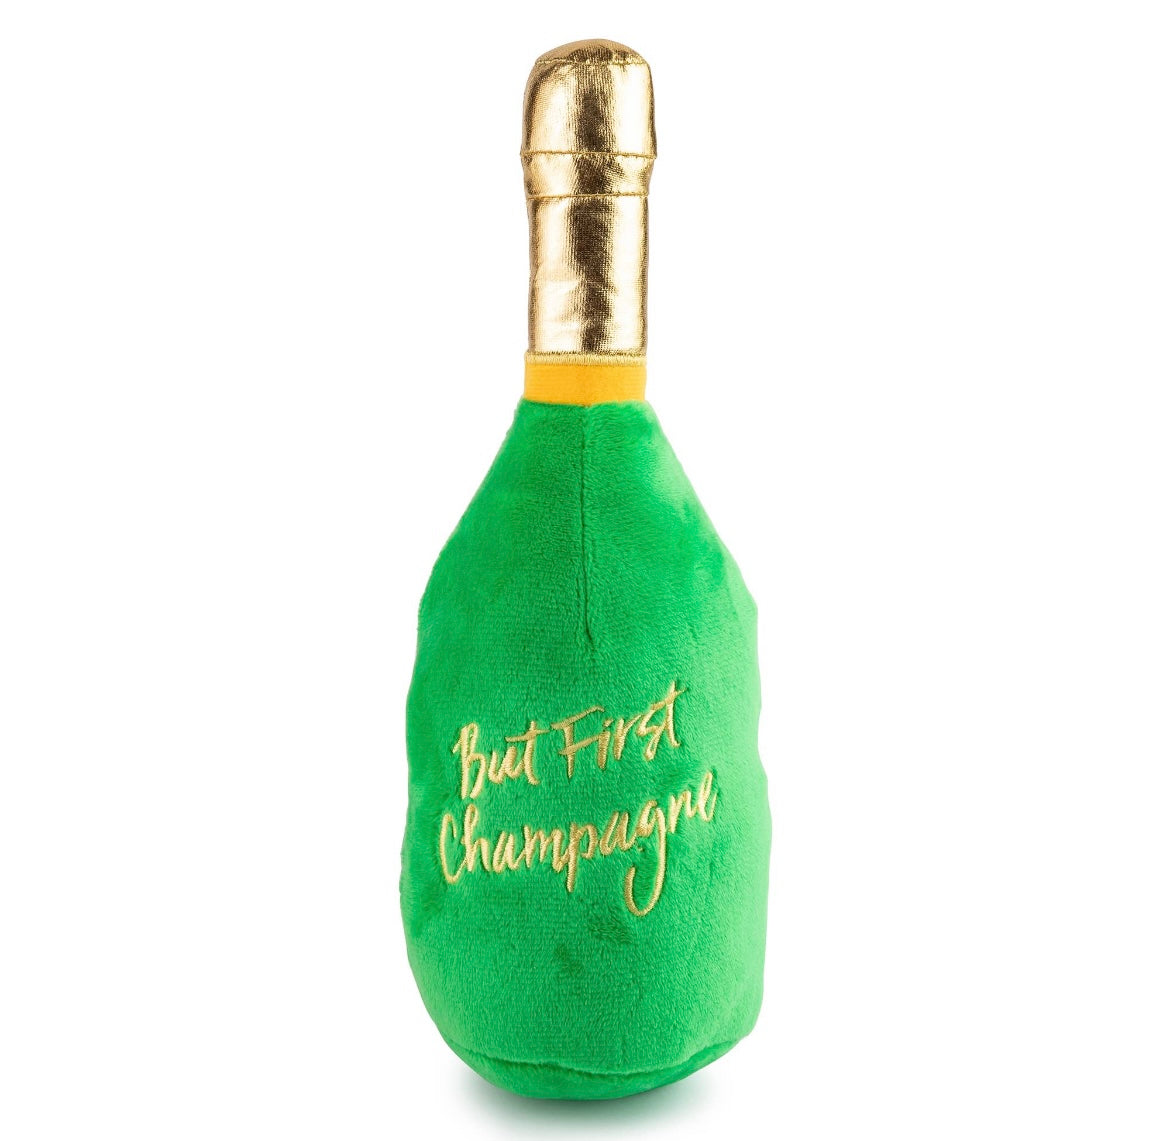 Champagne Classic Dog Toy